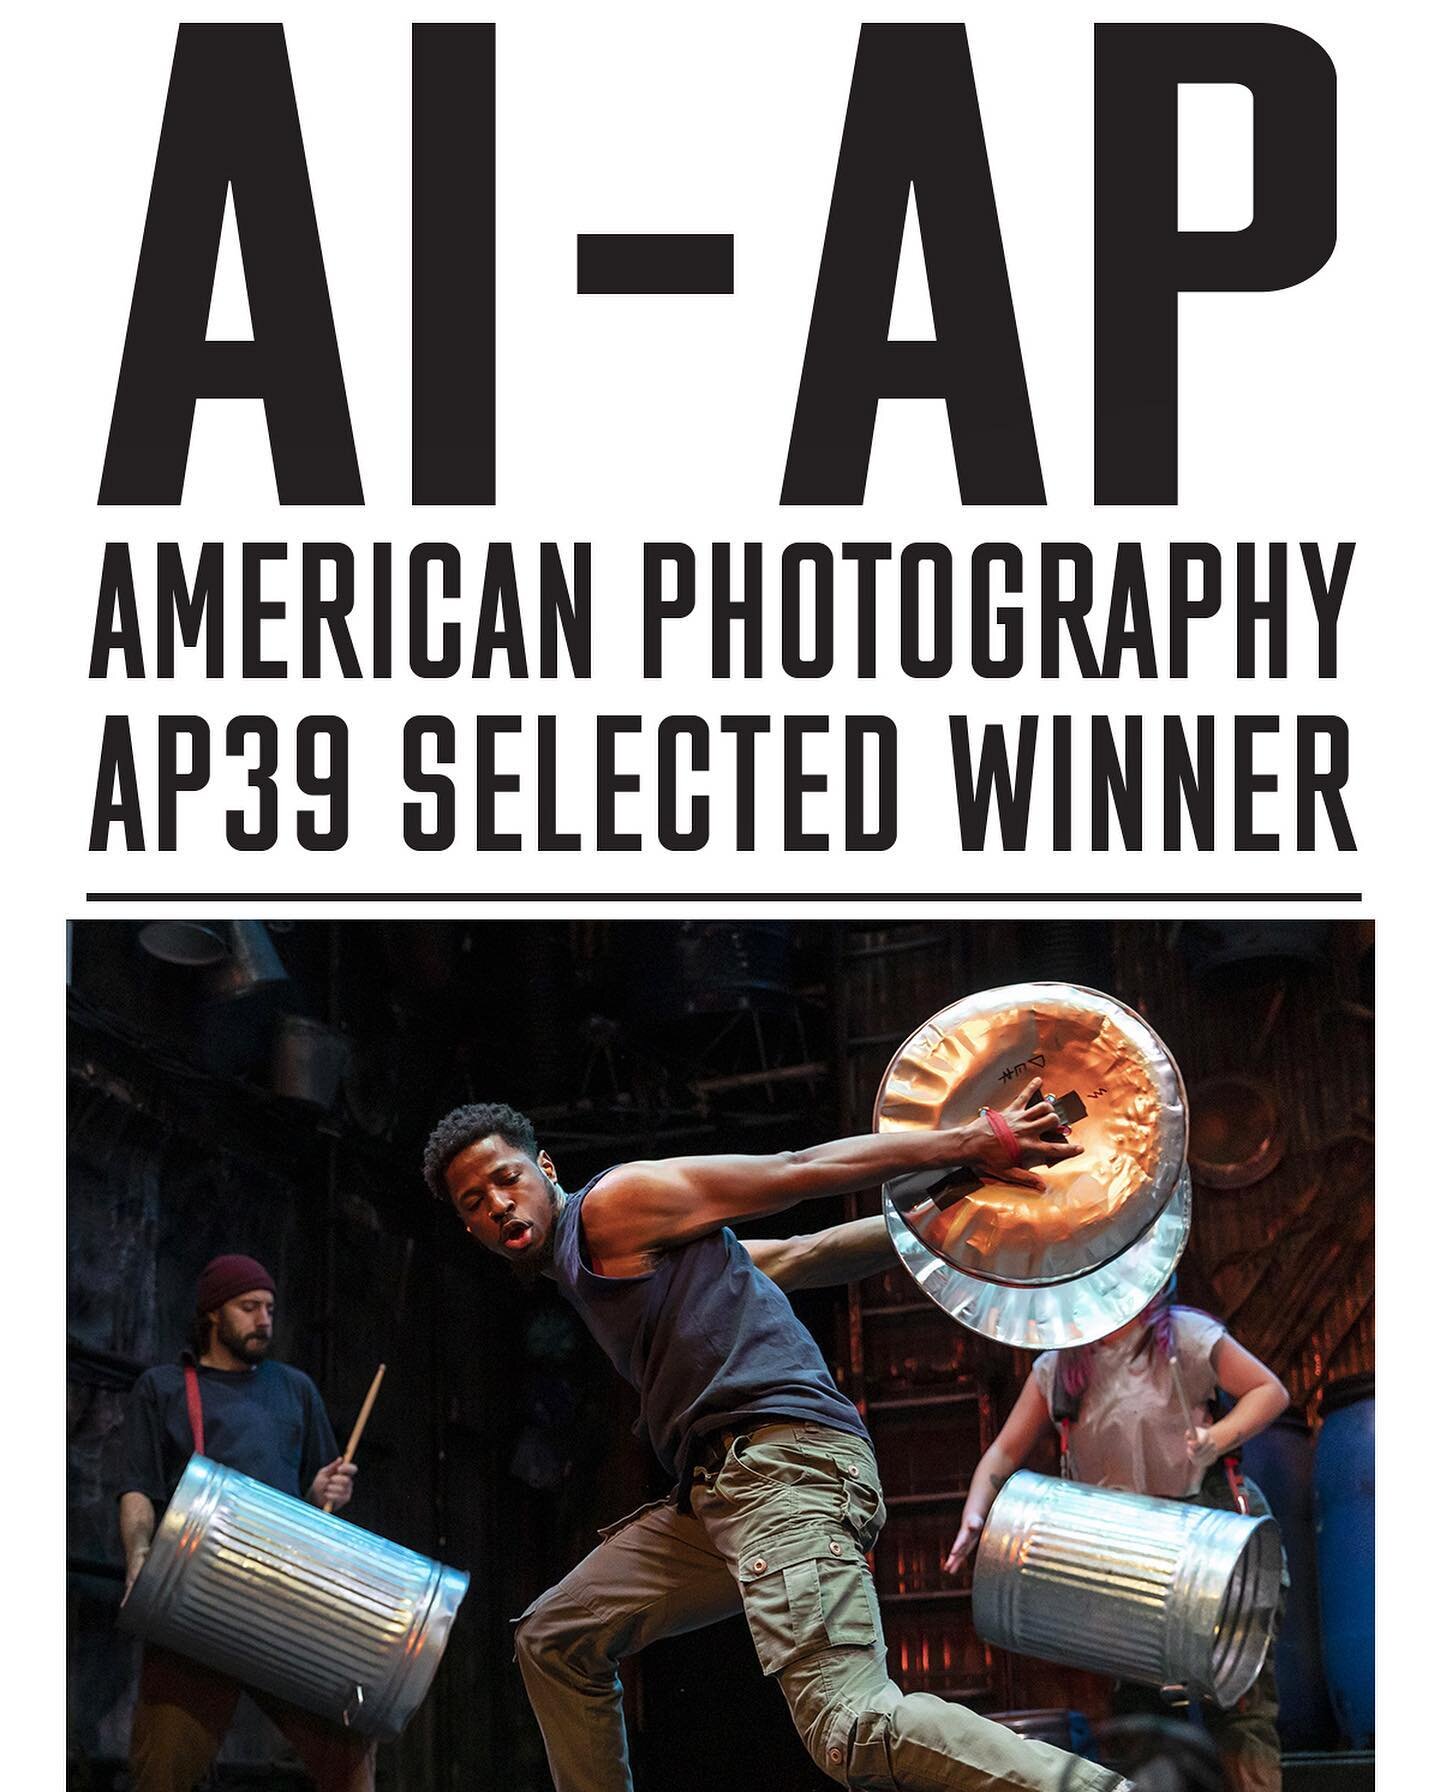 Excited to share that one of my photos from the @nytimes assignment photographing @stompnyc was selected to be published in the American Photography 39 book! 
From over 7000 entries the jury selected 443 images to appear in the book and represent the